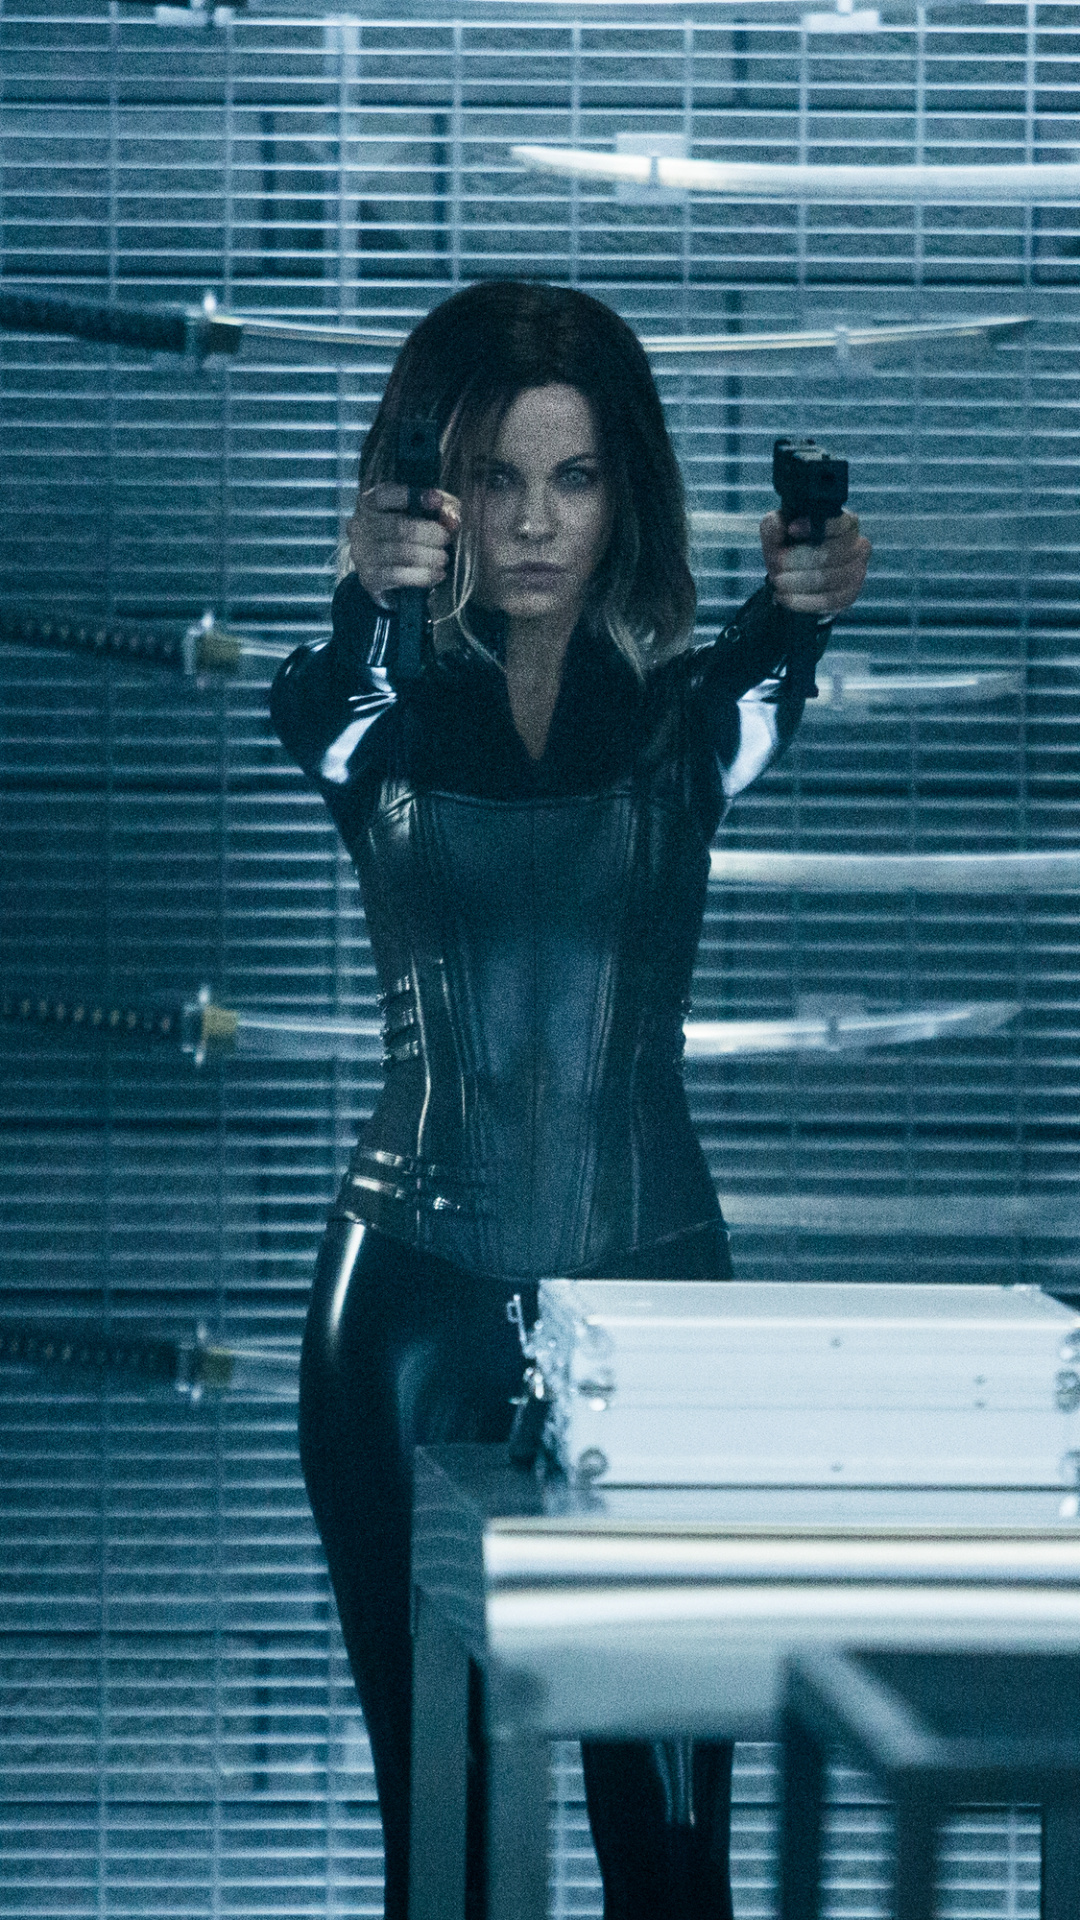 Selene (Underworld): A British actress, Popular for her roles in movies such as Van Helsing, Pearl Harbor, Total Recall. 1080x1920 Full HD Wallpaper.